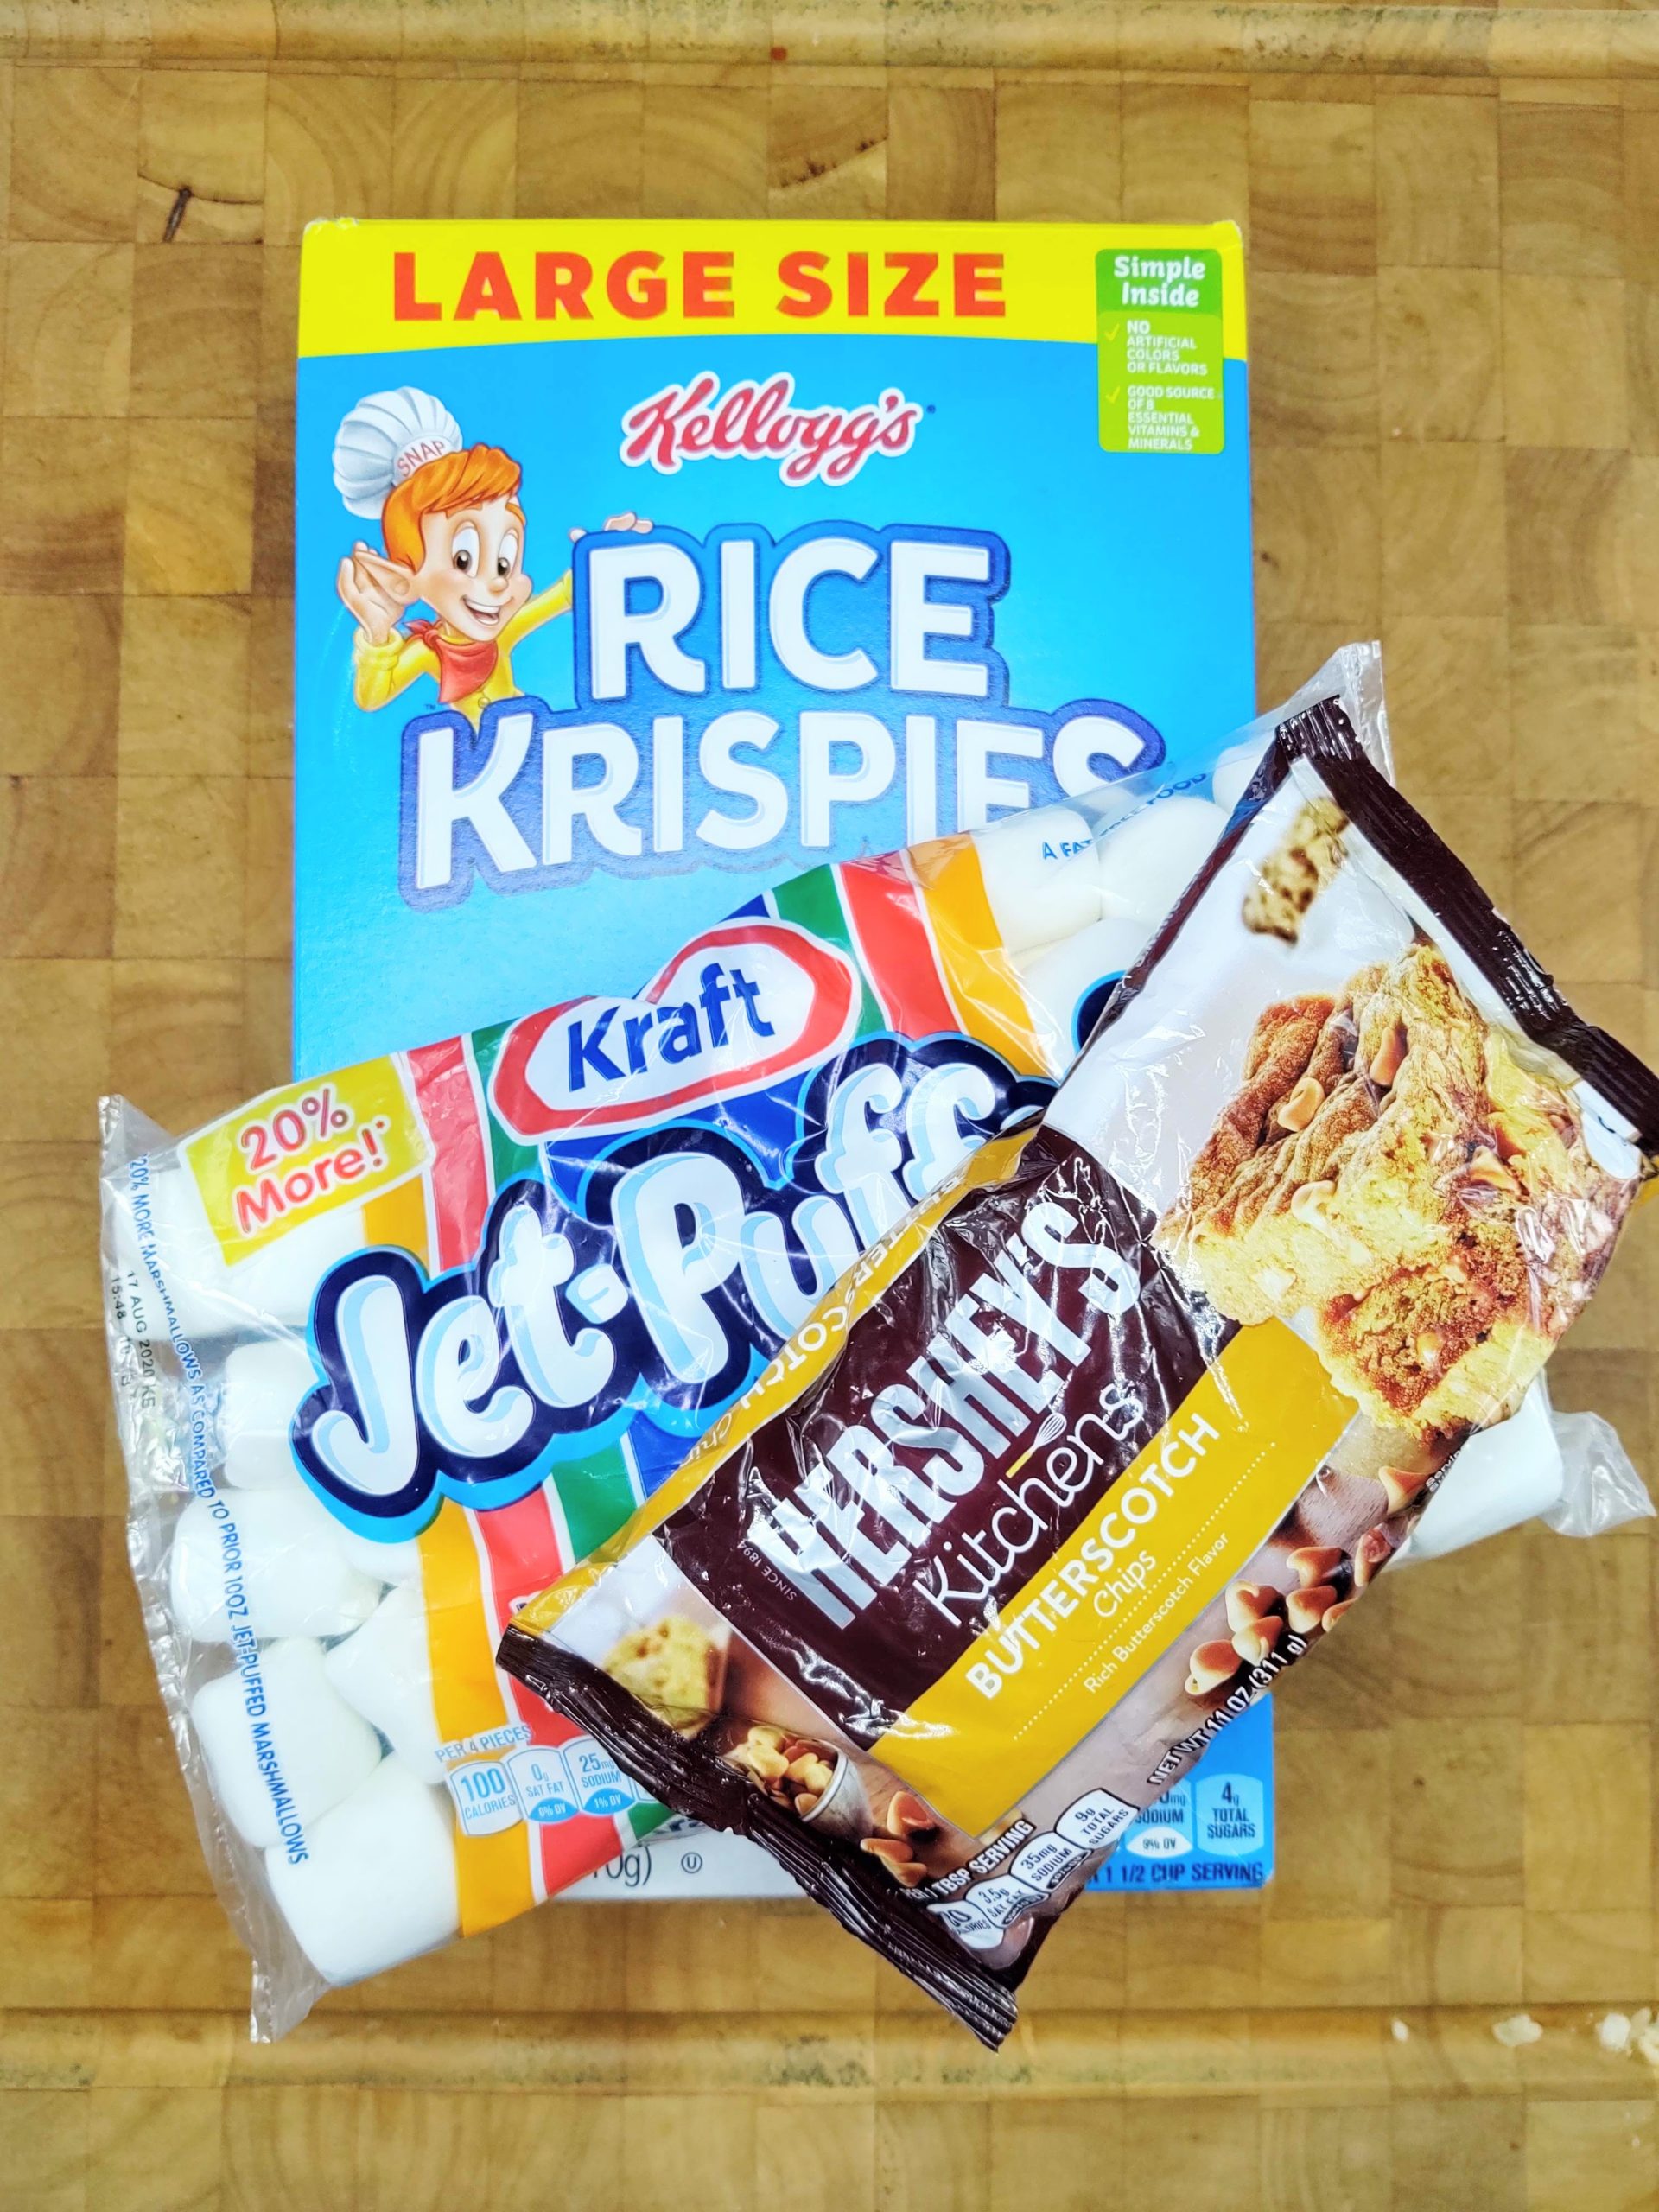 box of Rice Krispies, bag of Jet Puff marshmallows, a bag of Hershey's butterscotch chips